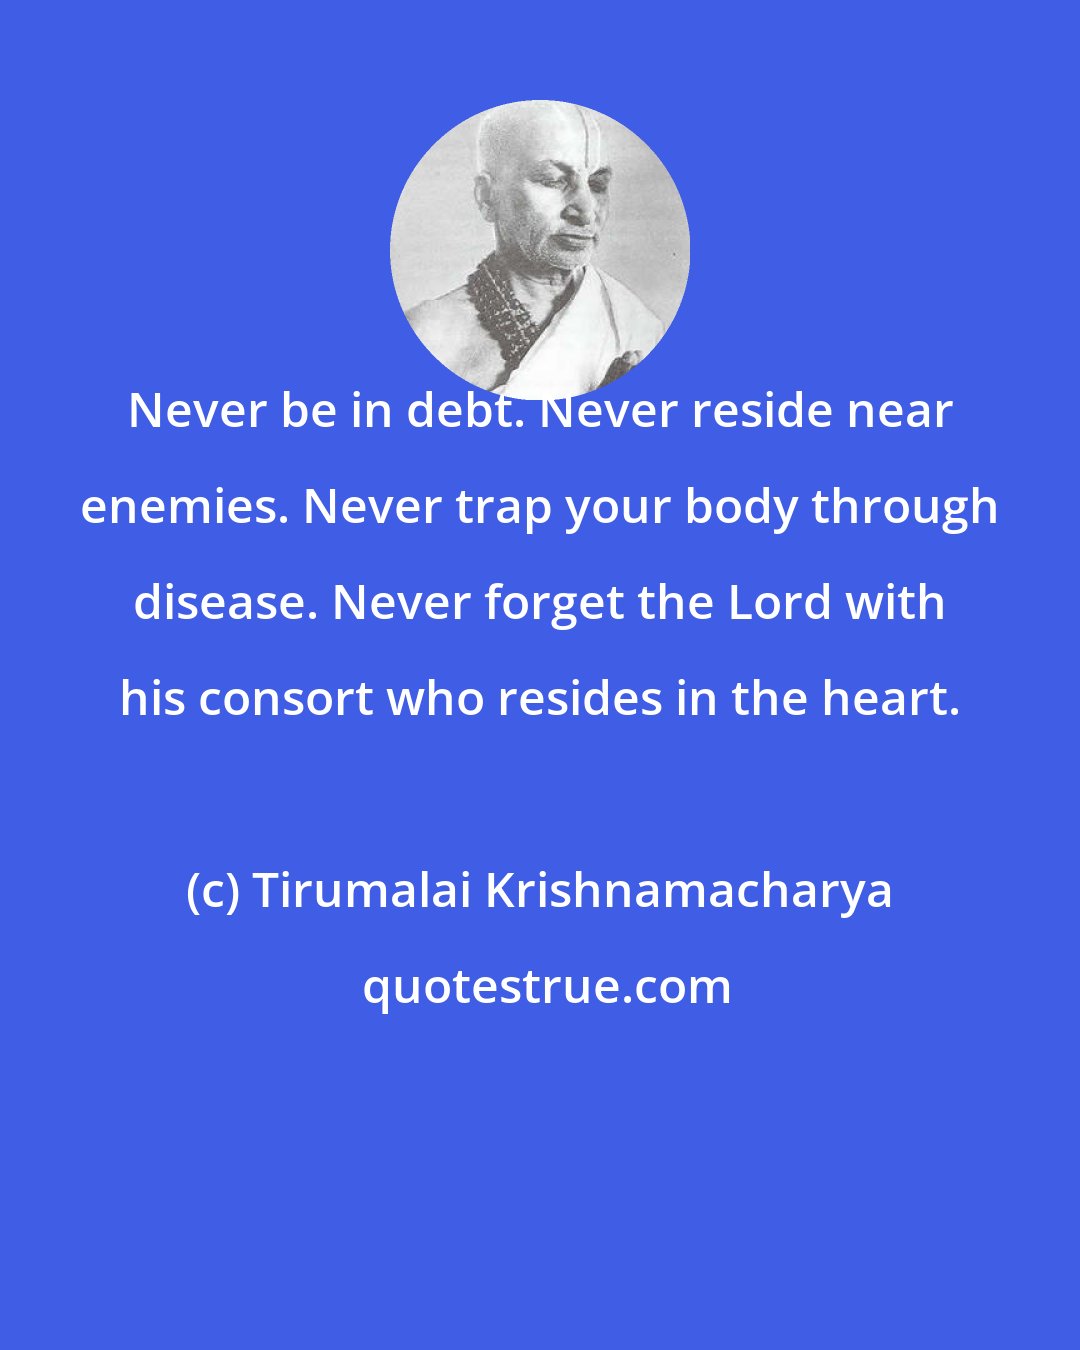 Tirumalai Krishnamacharya: Never be in debt. Never reside near enemies. Never trap your body through disease. Never forget the Lord with his consort who resides in the heart.